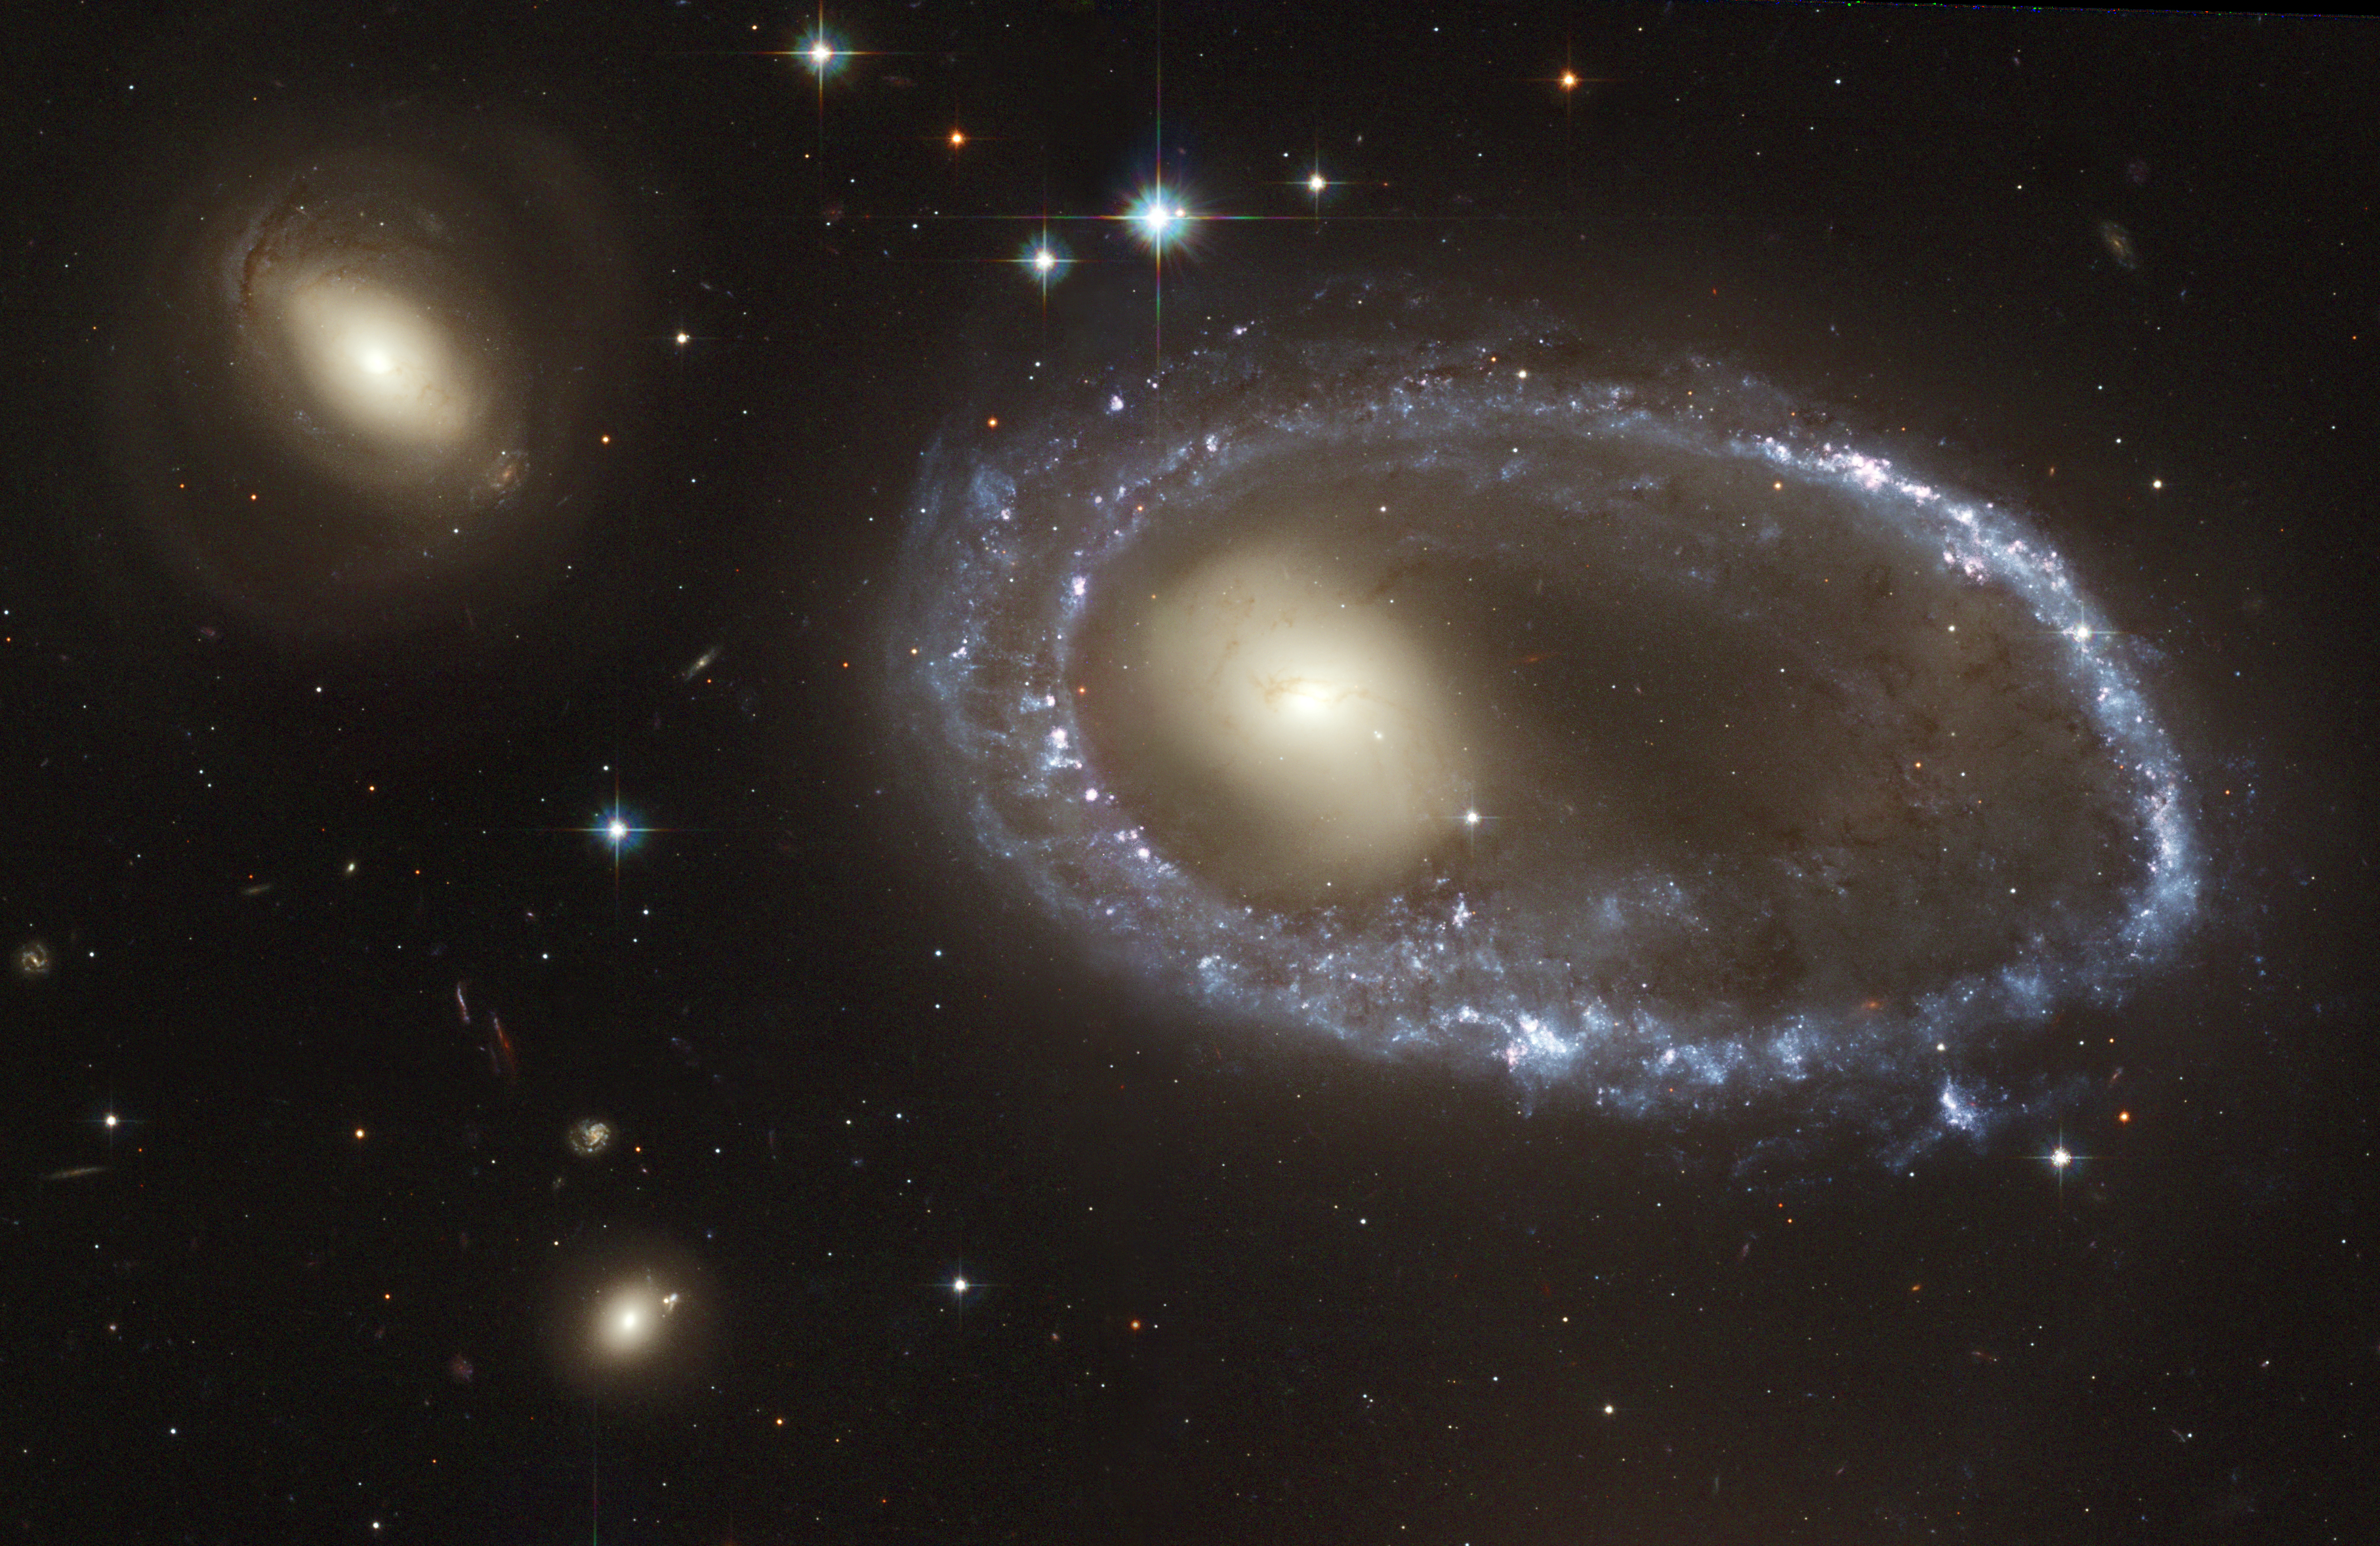 Ring galaxy AM 0644-741 (captured by the Hubble Space Telescope)